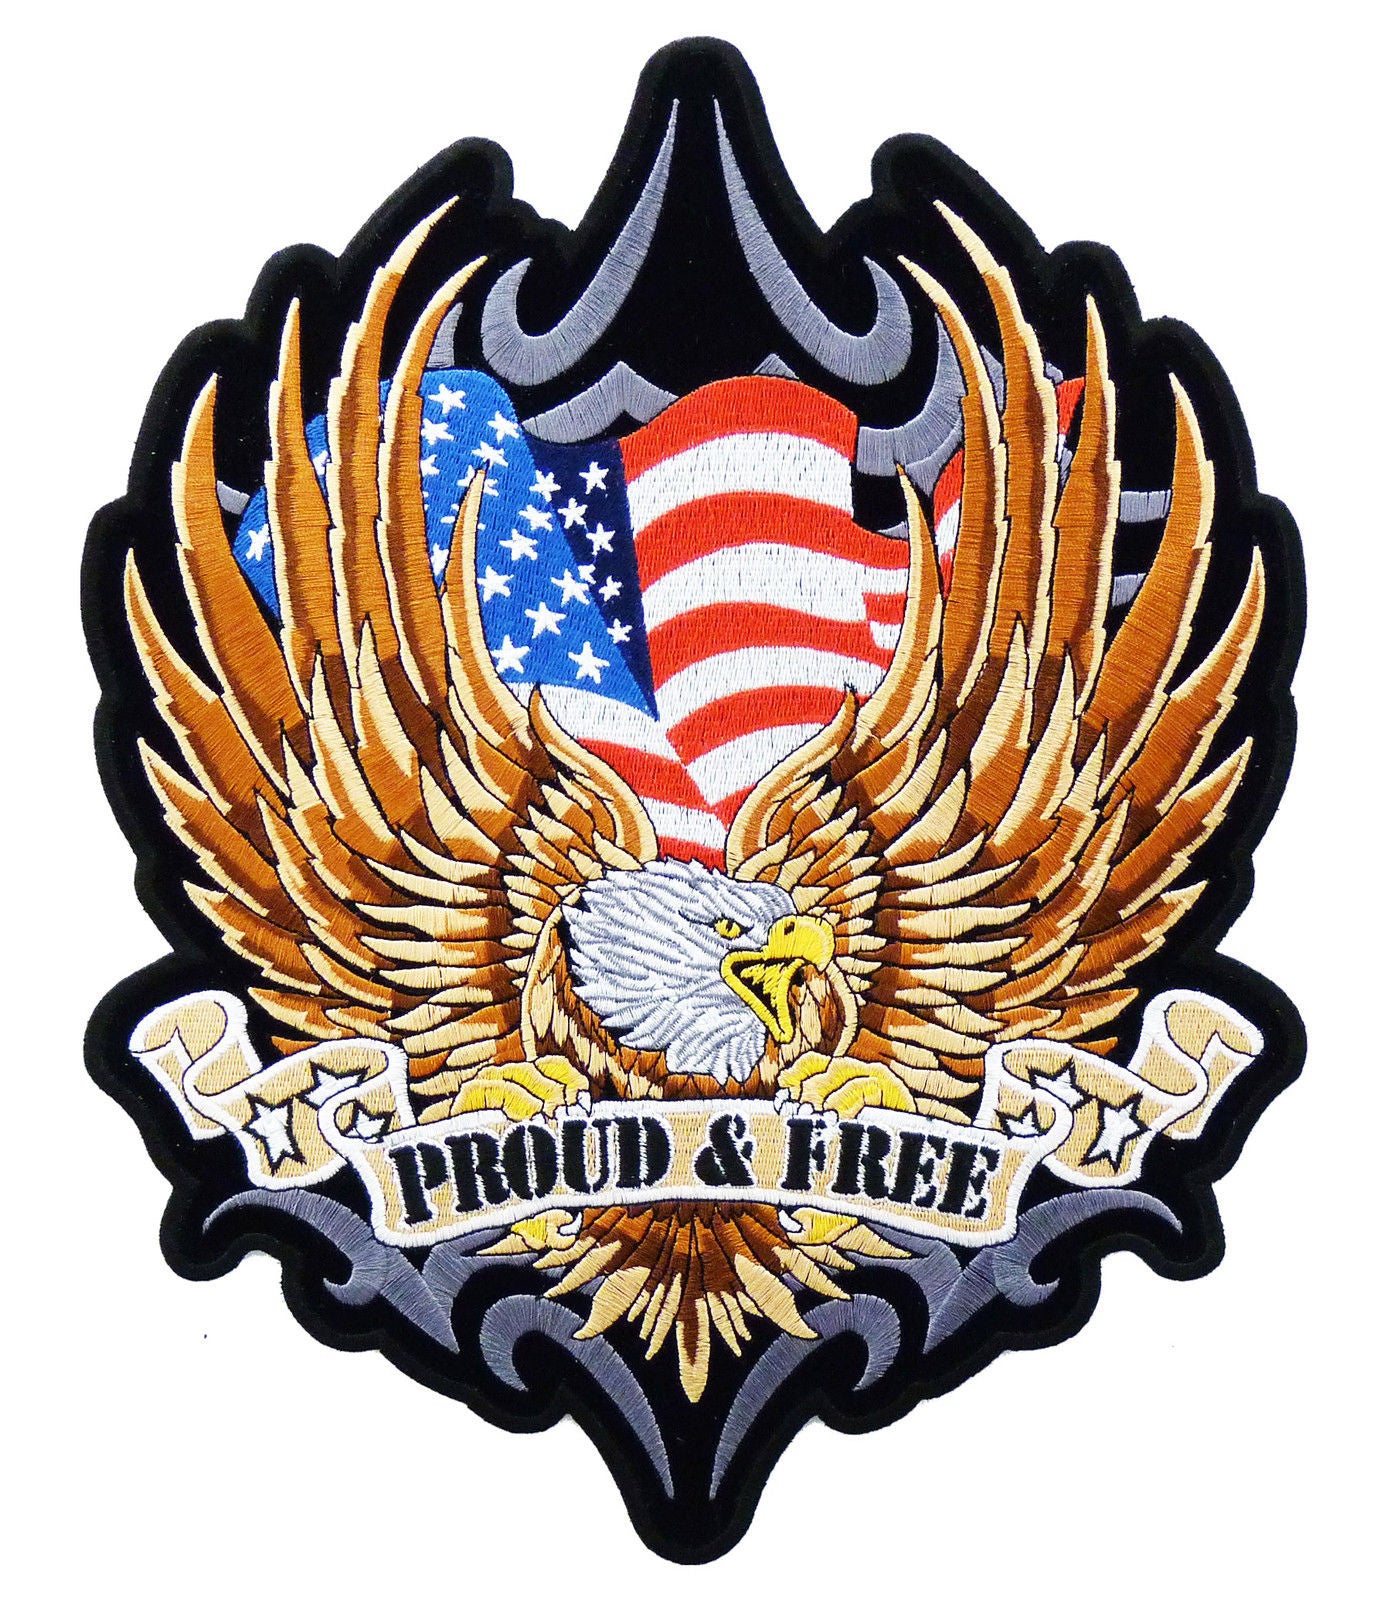 Proud and Free Patch Best Biker Bandana Buffs in India online for Men and Women, T shirts, Bandanas